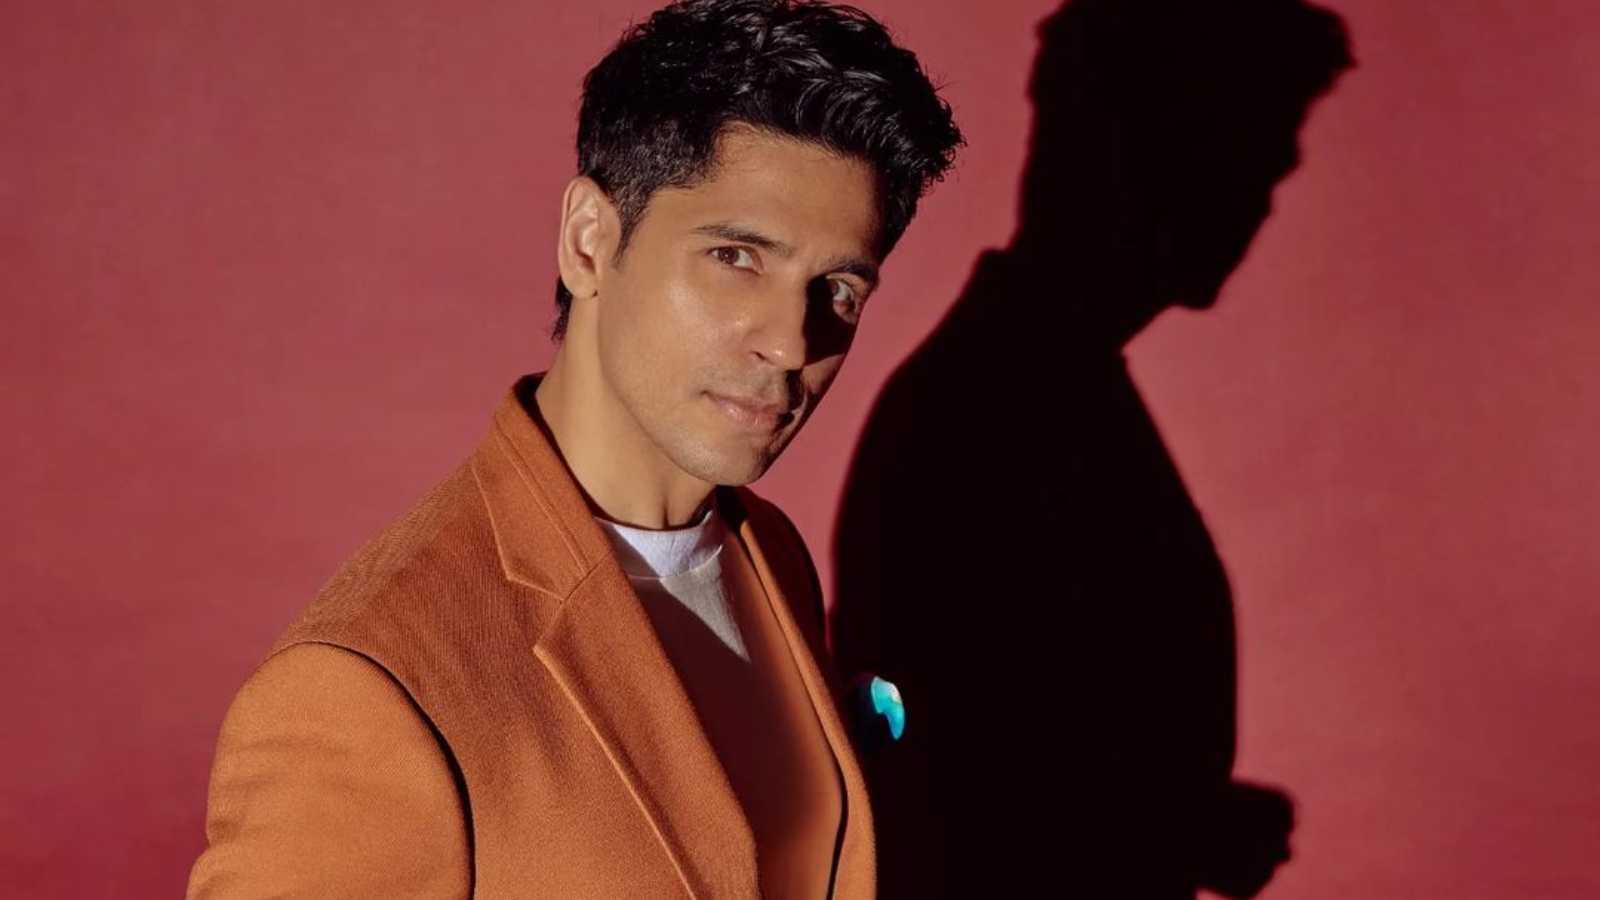 Sidharth Malhotra confesses he was typecast initially because of his good looks, adds, 'It's never a bad thing to be easy on the eyes'